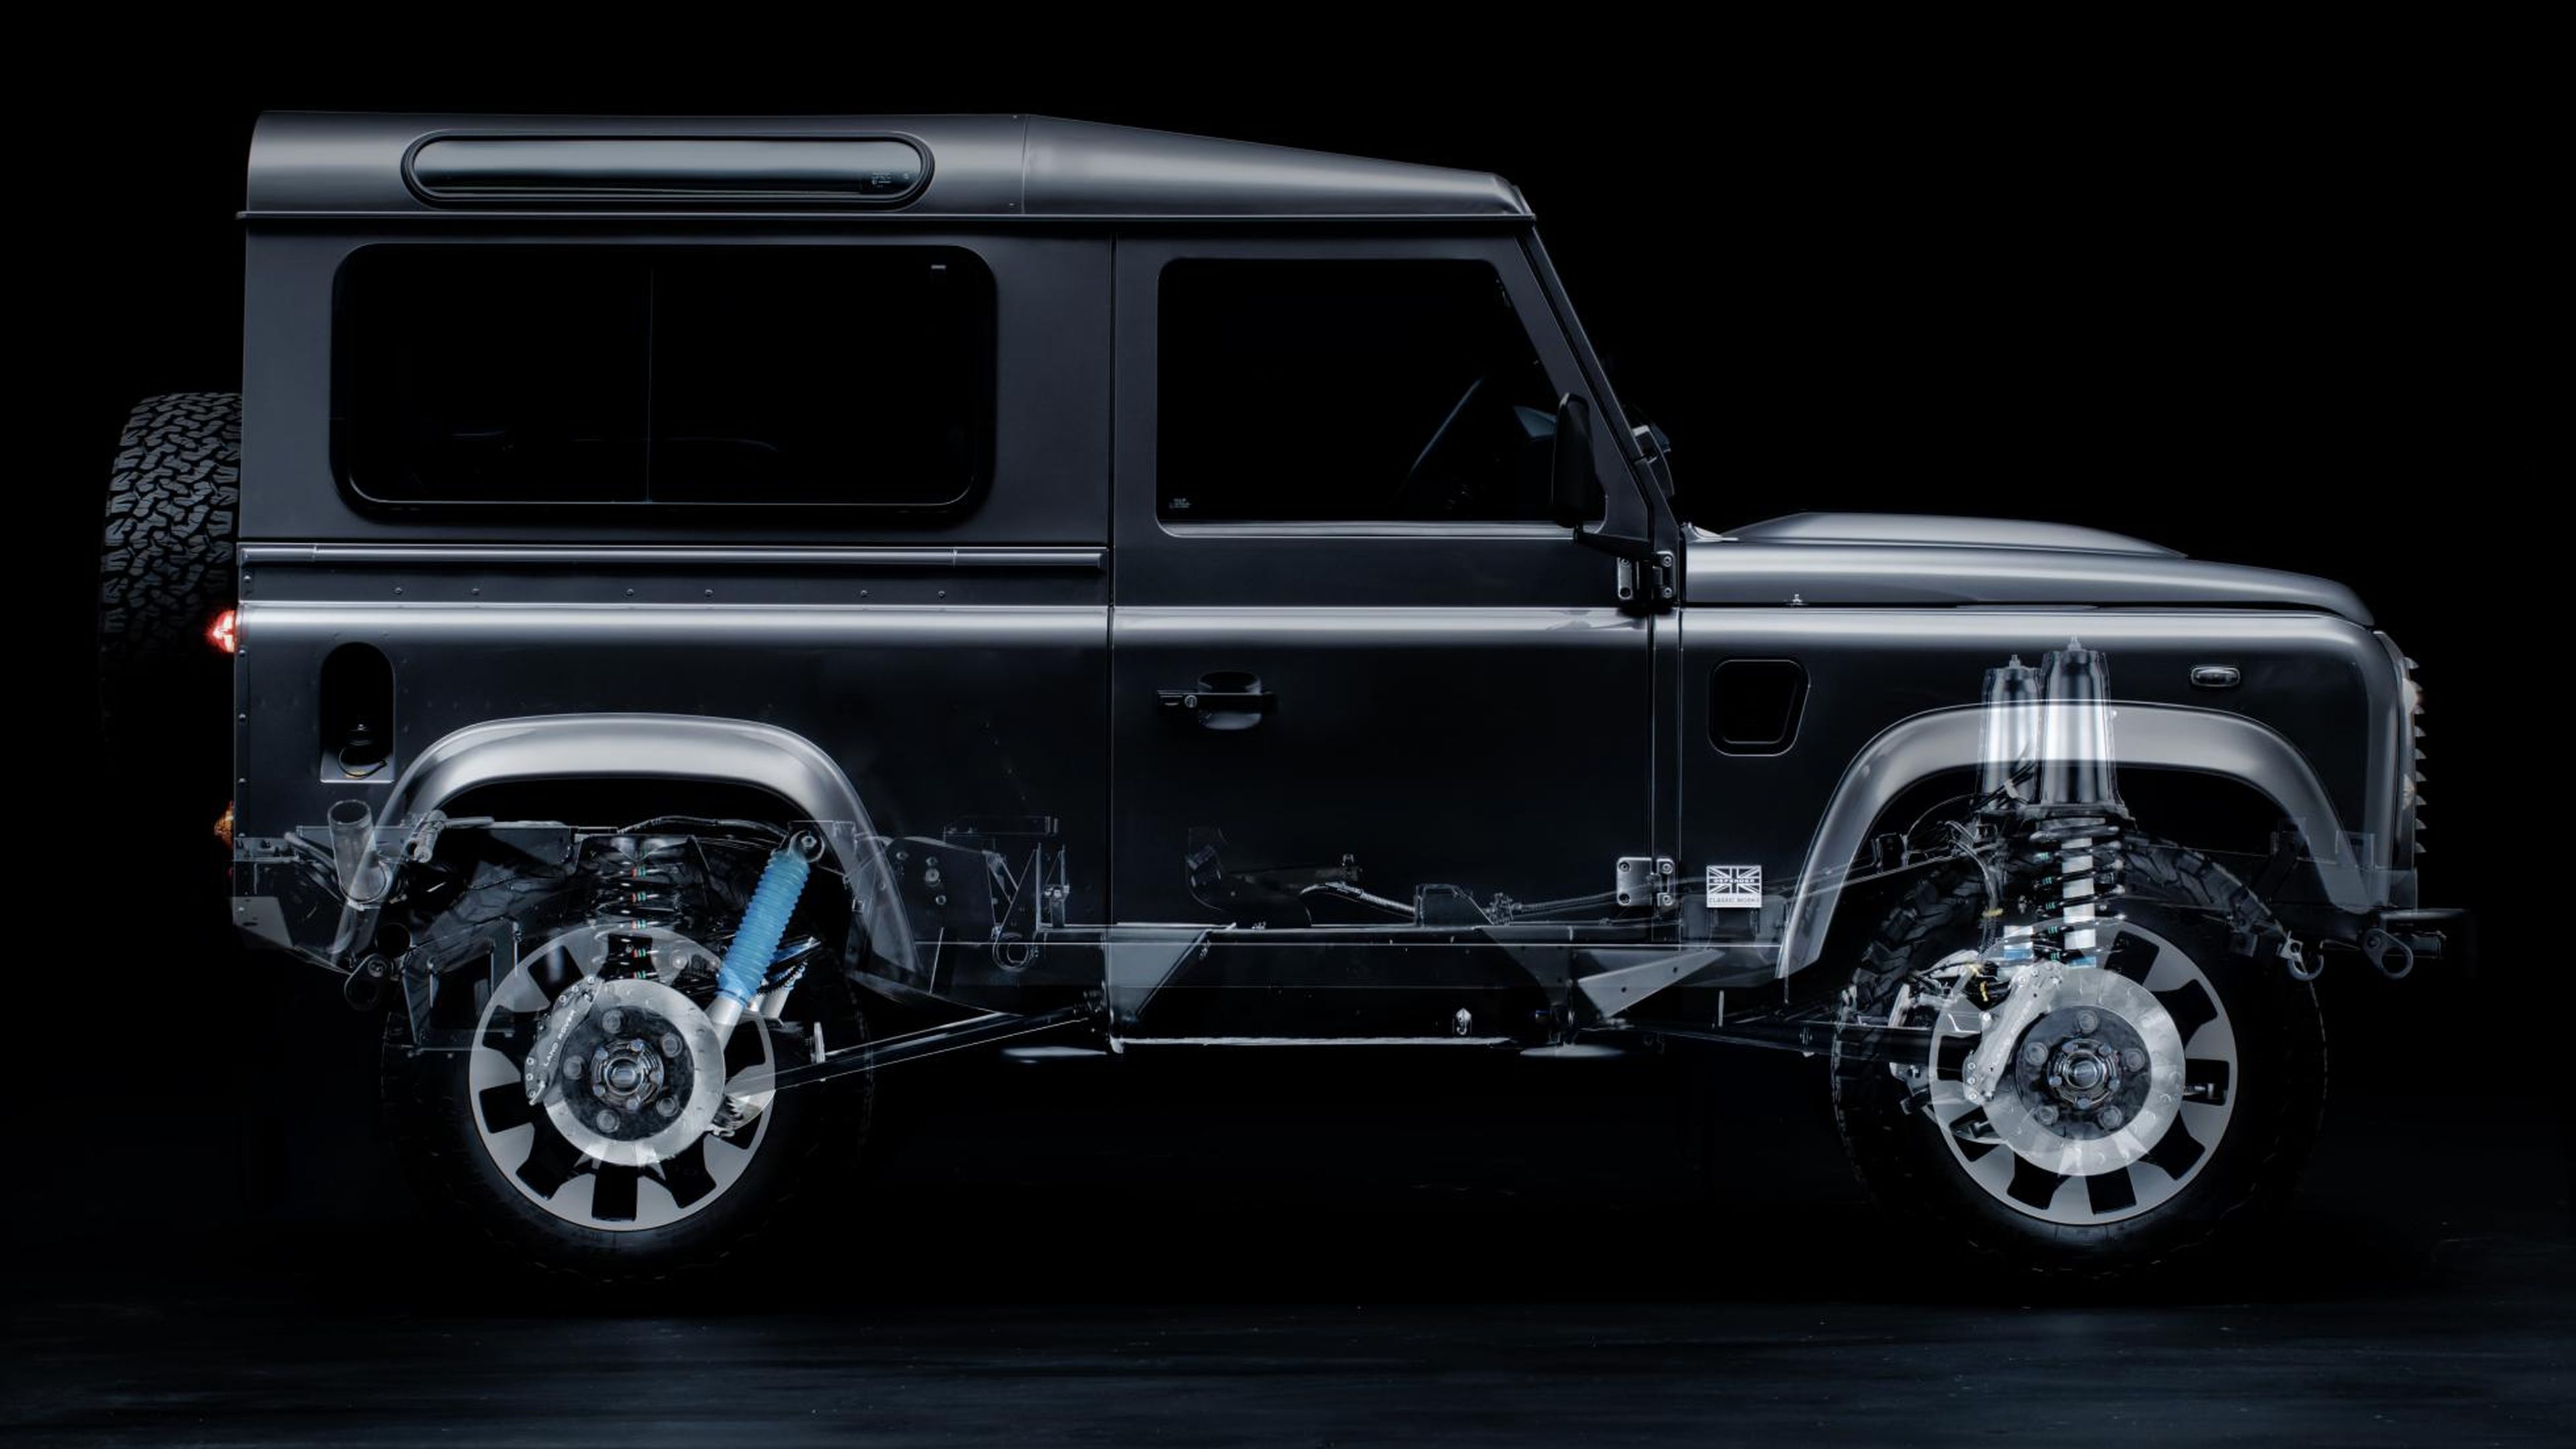 Land Rover Defender Classic Works